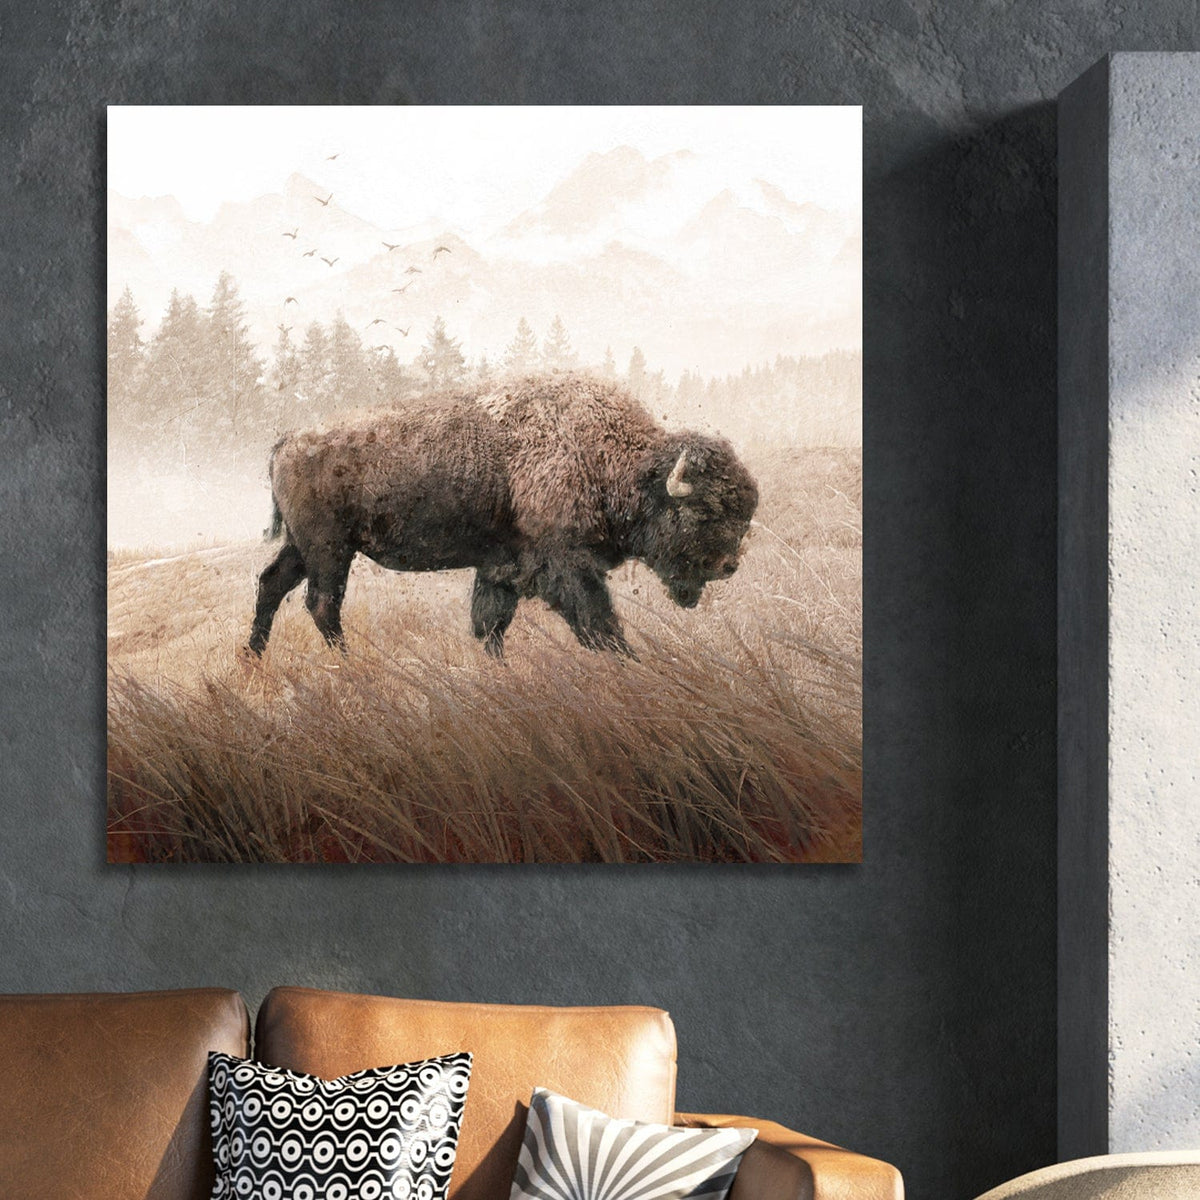 stunning rustic decor for your home - Lone Buffalo